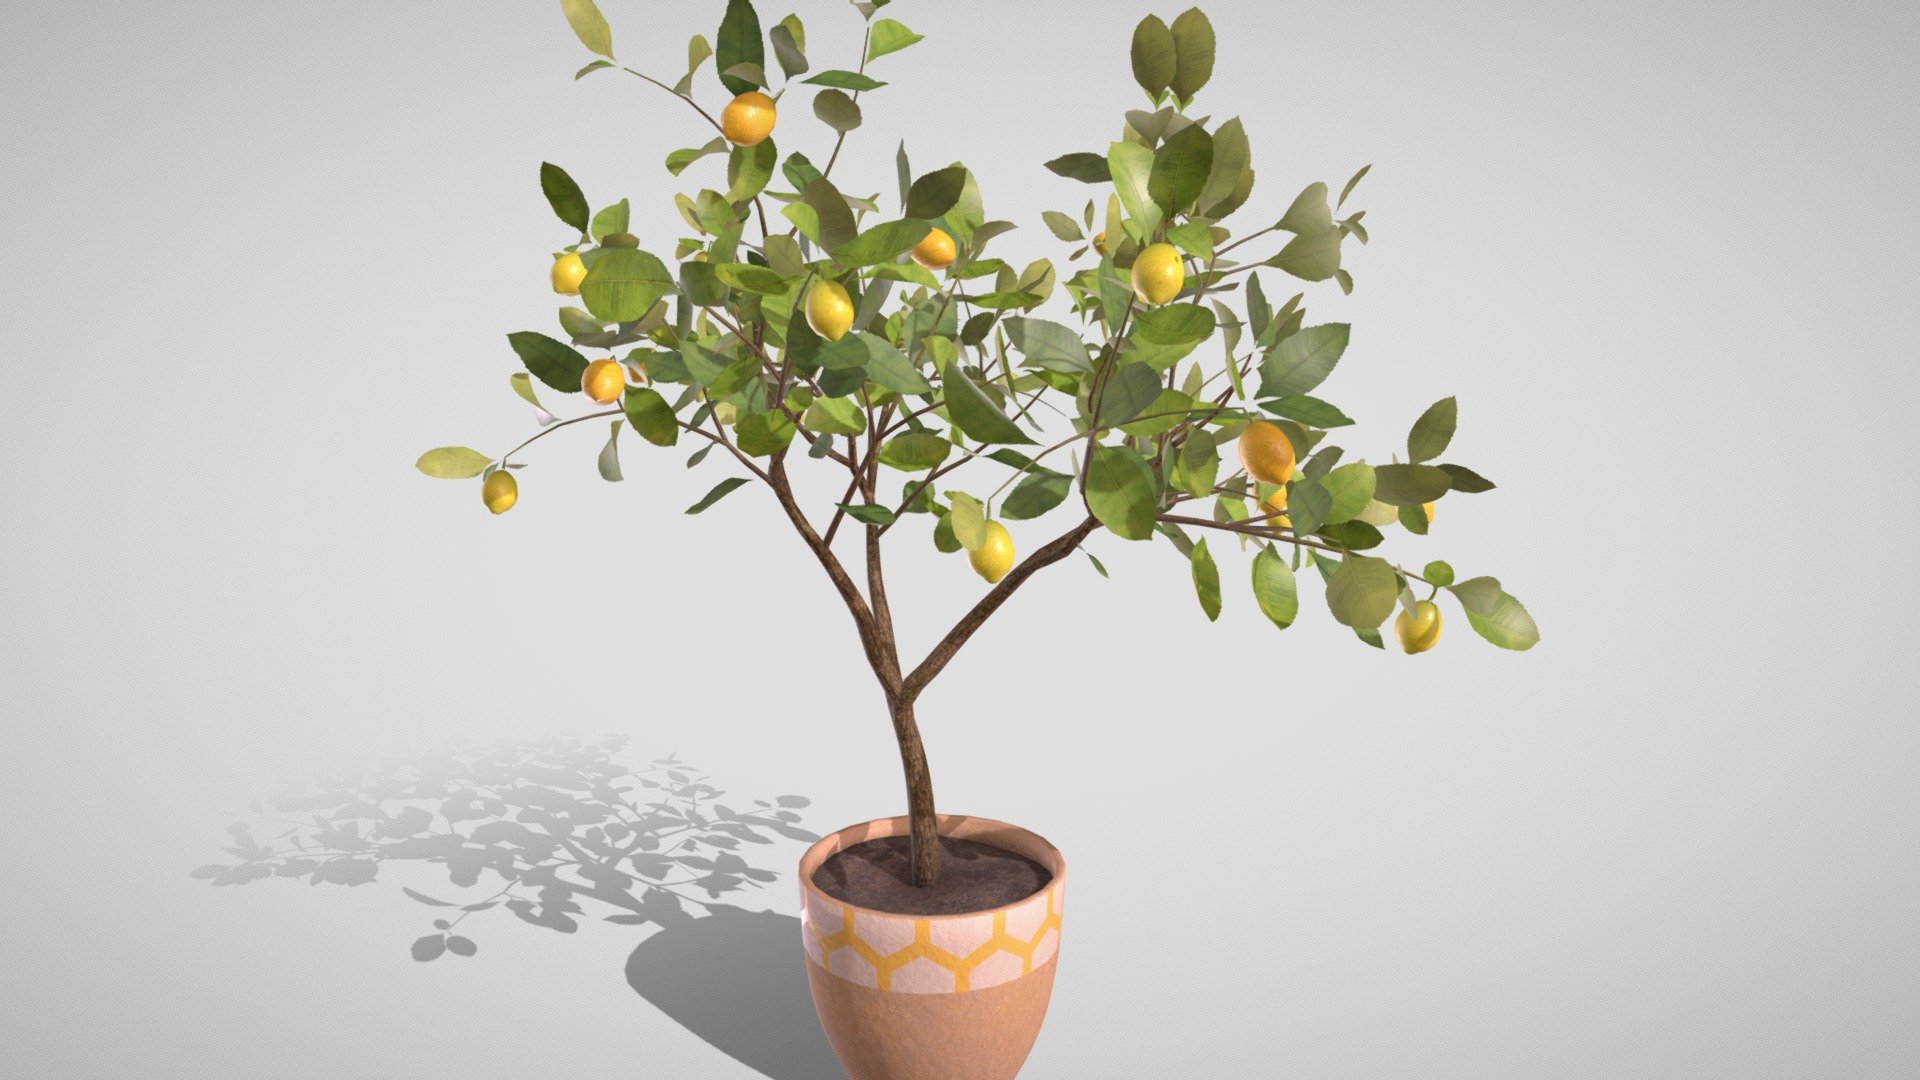 Detailed model of a lemon tree with bright fruits.
A lemon tree will be a unique decoration for the interior of an apartment, garden or street. 

And also will add nature vibes to your 3D project, game or metaverse:)



Video about the model


Model info



quads clean topology, 14k faces

clean unwrapped UV

3 sets of texture maps in 4K and 2K resolution

3 materials

ready to use in blend and fbx format

Built with Blender. Origin Blender file attached


Thanks for watching^.^
Want to buy this model? Please tell me where you want to use it.

Have questions about the model? Mail me: tochechkavhoda@gmail.com - Lemon tree in a pot (3D) - Buy Royalty Free 3D model by tochechka 3d model